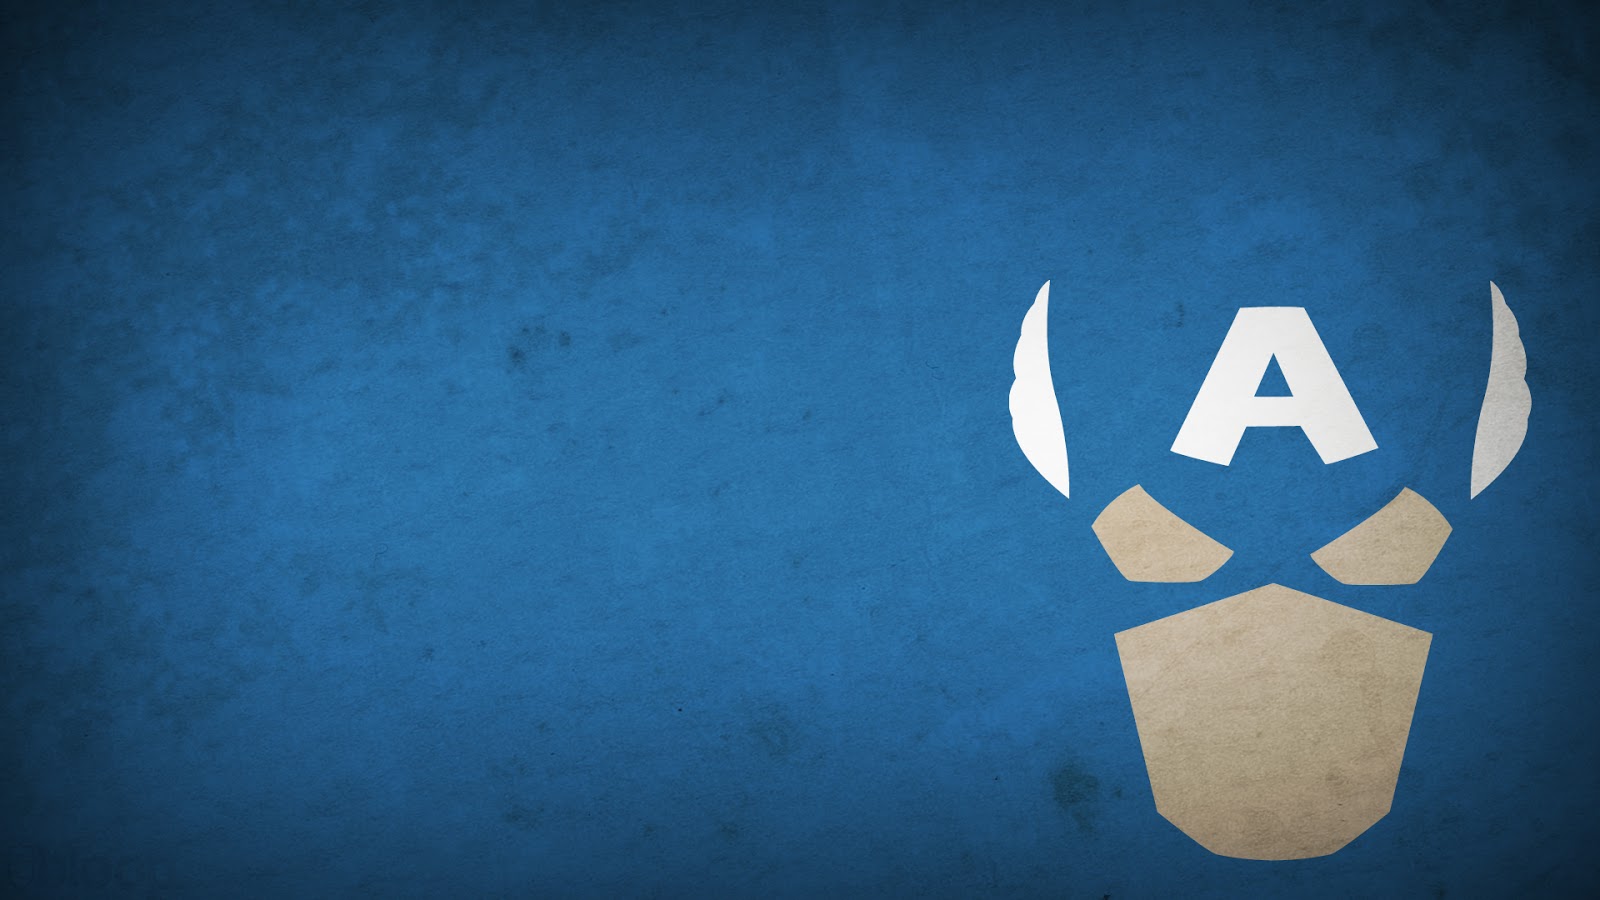 Wallpaper Minimalist Heroes Pack HD 1080p Central Photoshop